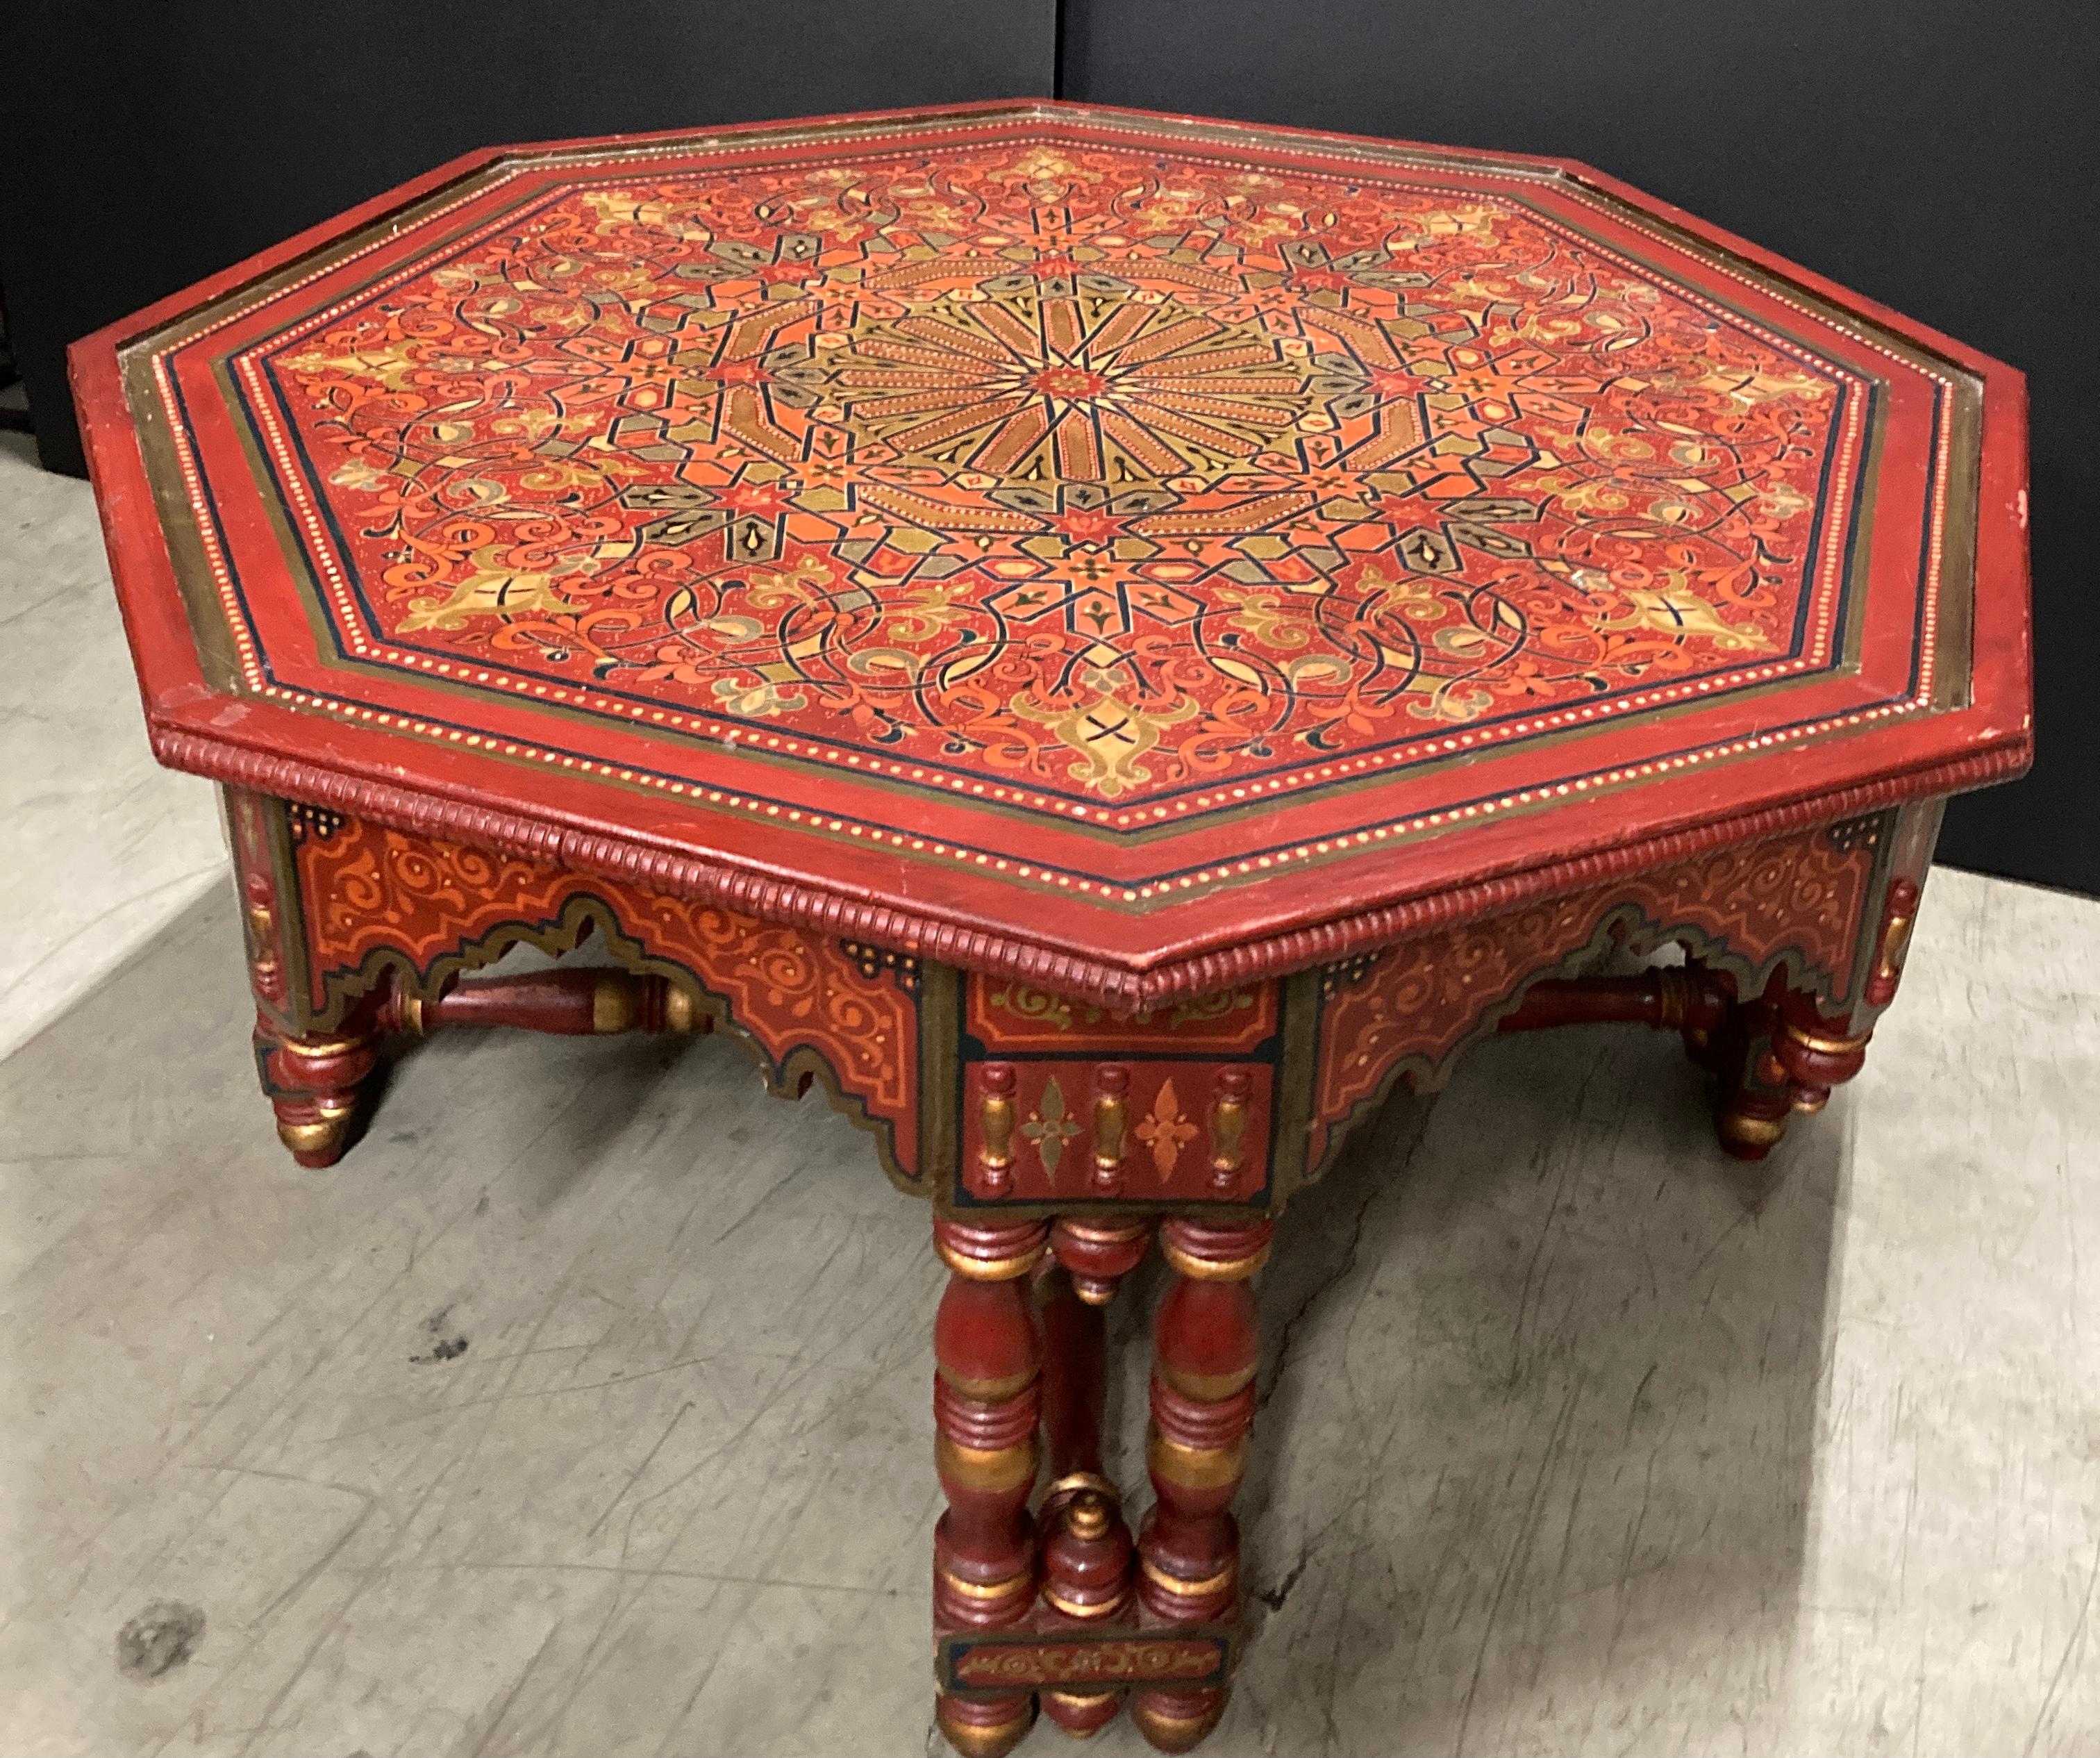 20th Century Hand-crafted Hand-Painted Red Octagonal Moroccan Coffee Table